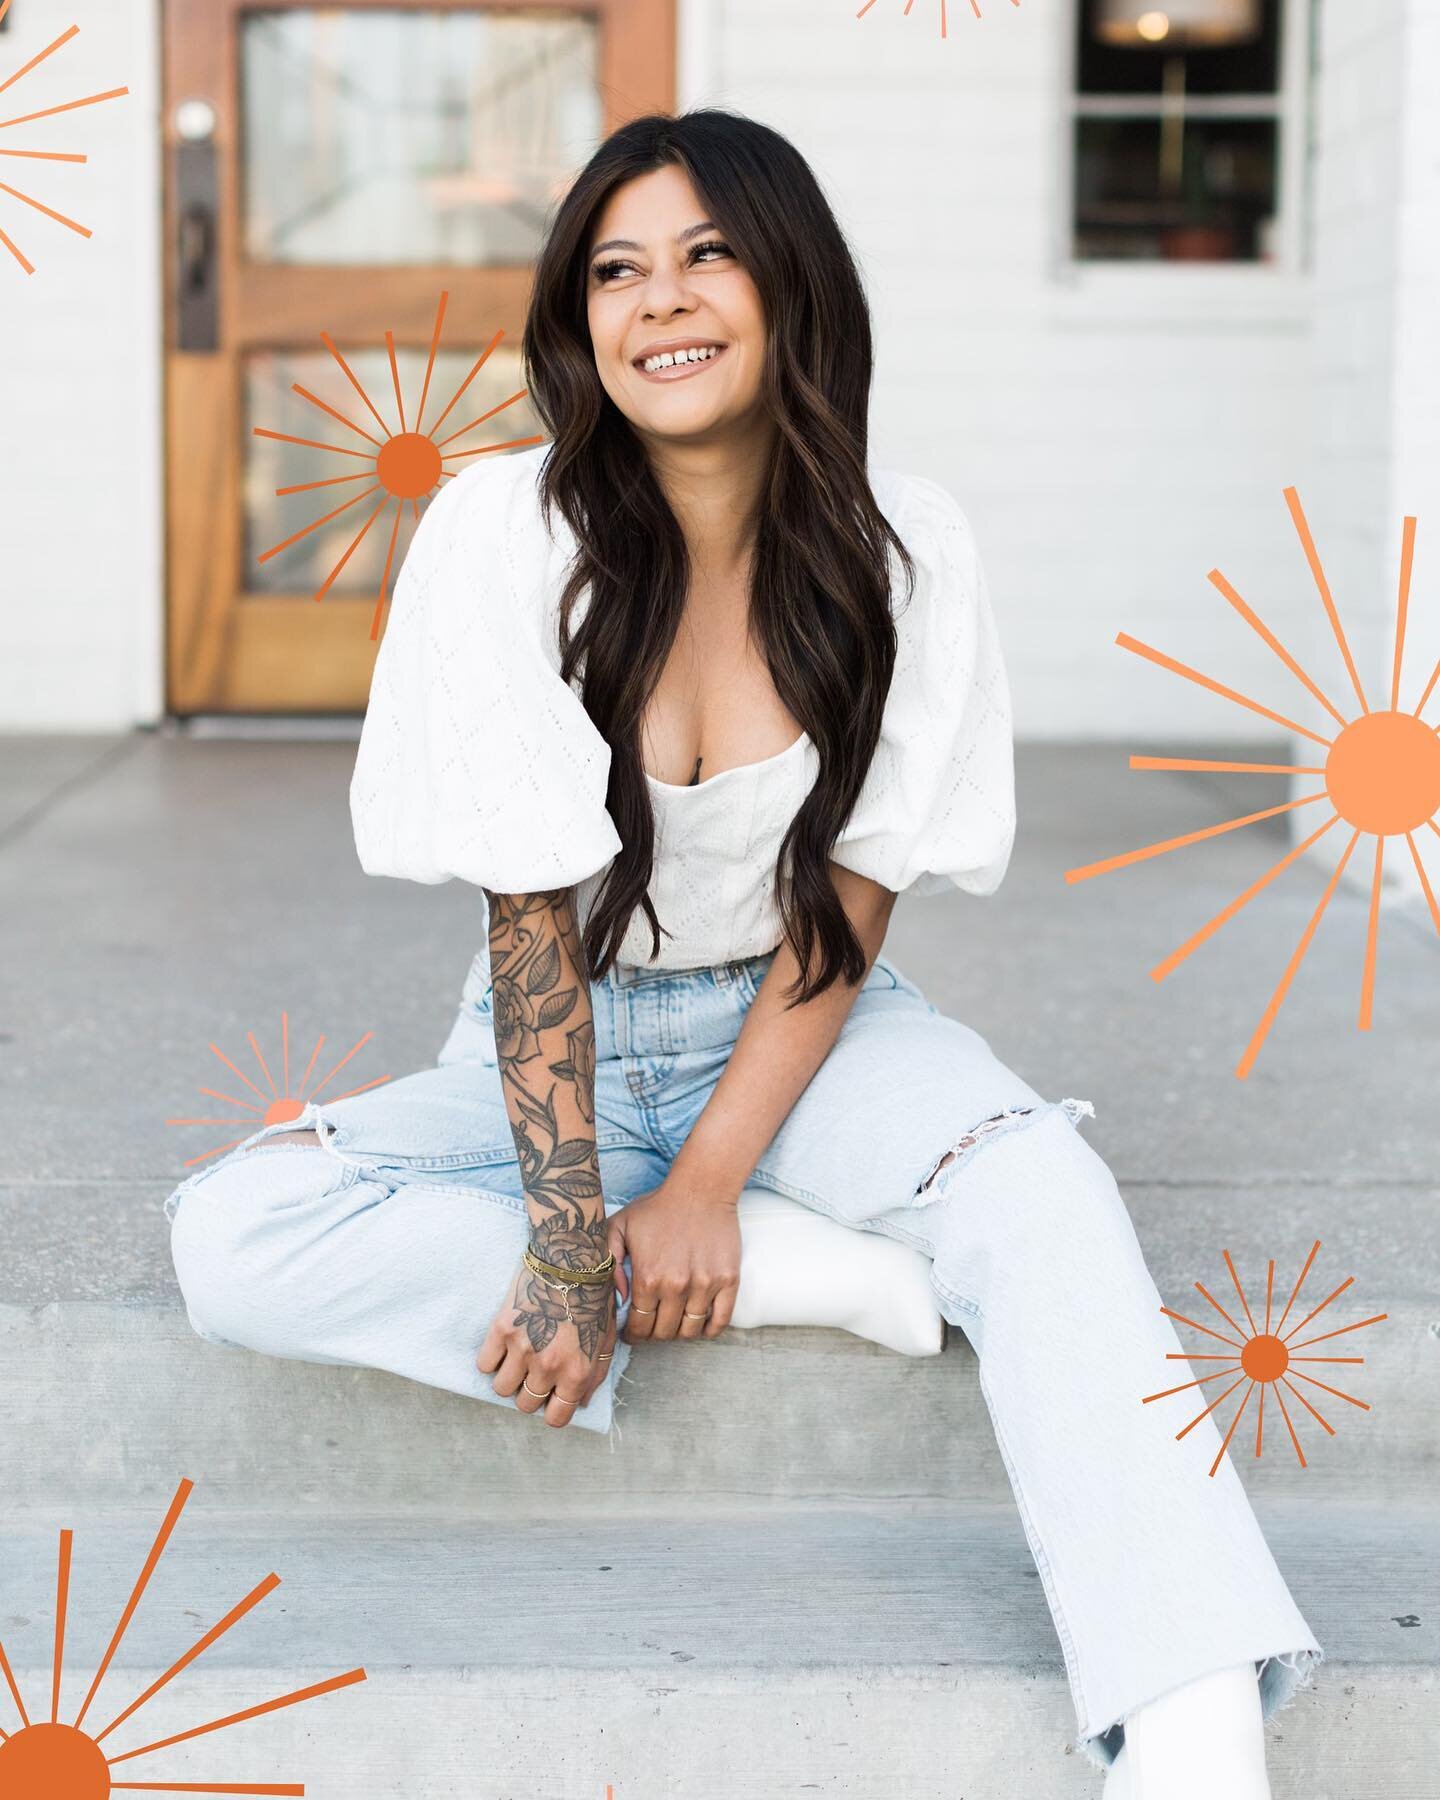 We promised we would start introducing our stylist so we figured today was the best day for that since we open in a week!! 

Meet Janna 

Born and raised in HAWAIIIIIII 🌴 
But she&rsquo;s been here for 9 years and in the hair industry for 6. 
Don&rs